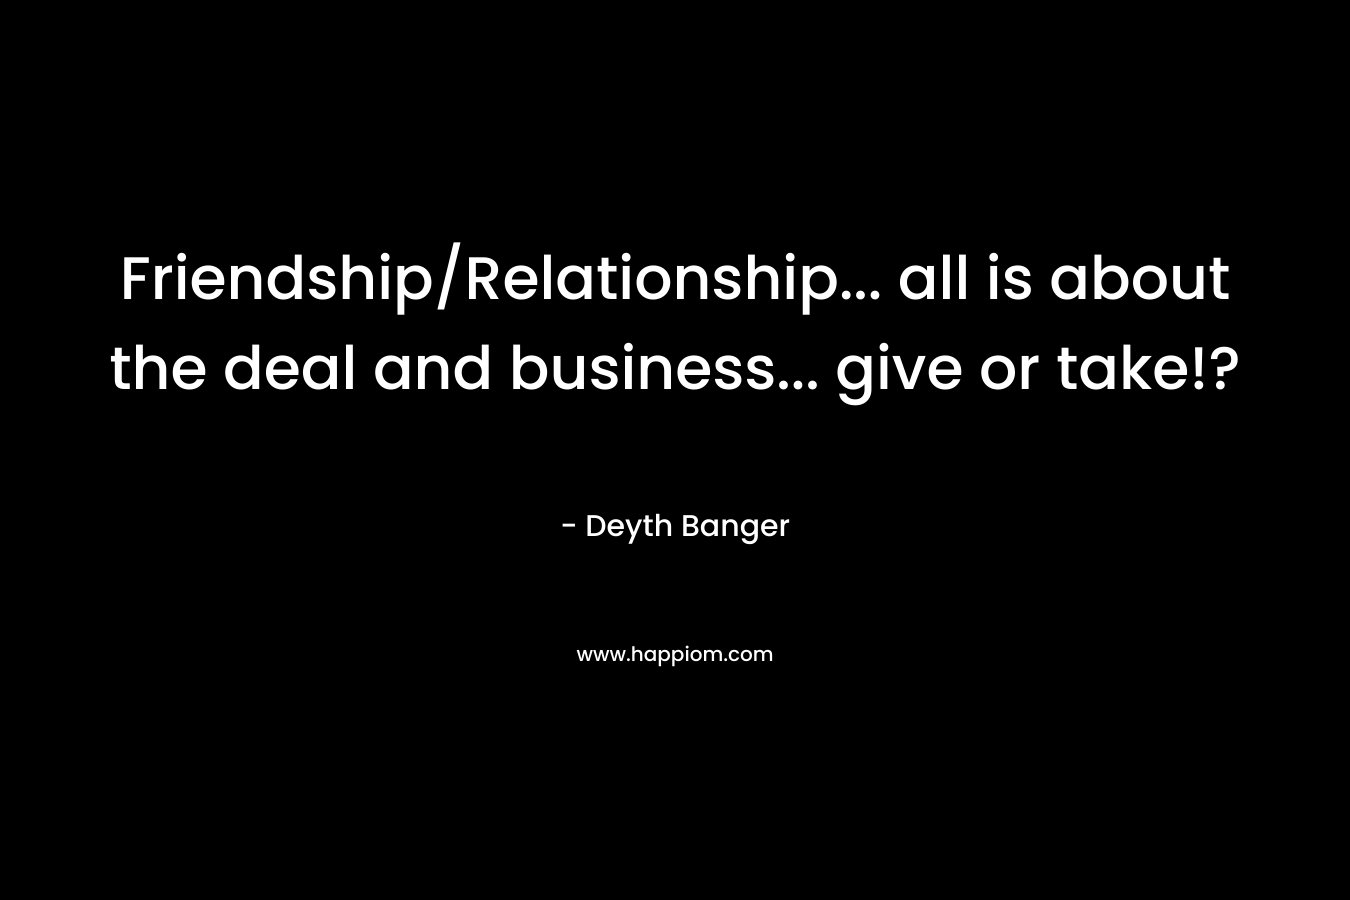 Friendship/Relationship… all is about the deal and business… give or take!? – Deyth Banger